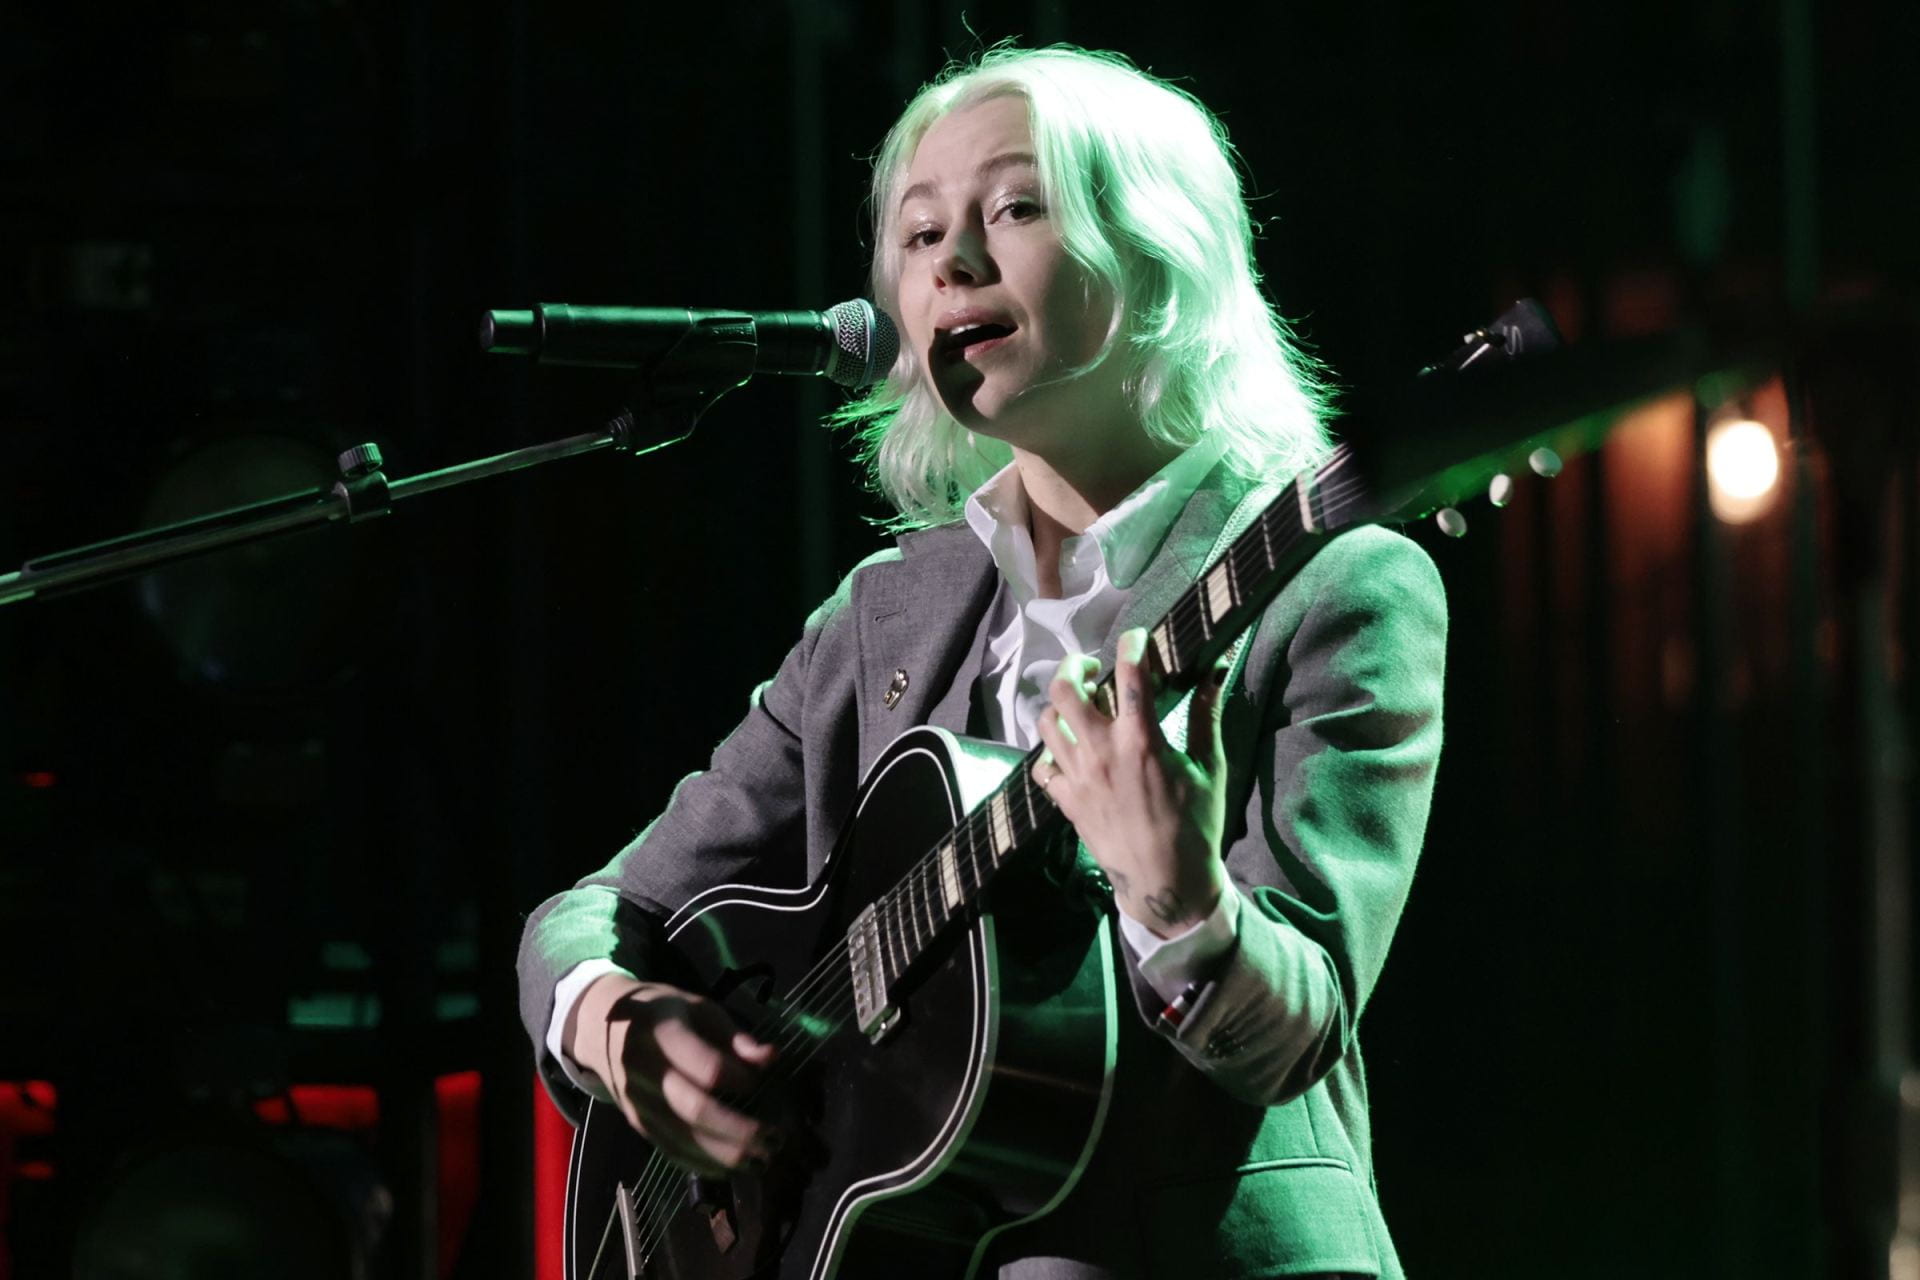 Boygenius' Phoebe Bridgers has mastered a whispery, intimate delivery when songs call for it. Credit: Elizabeth Robertson (via TNS)